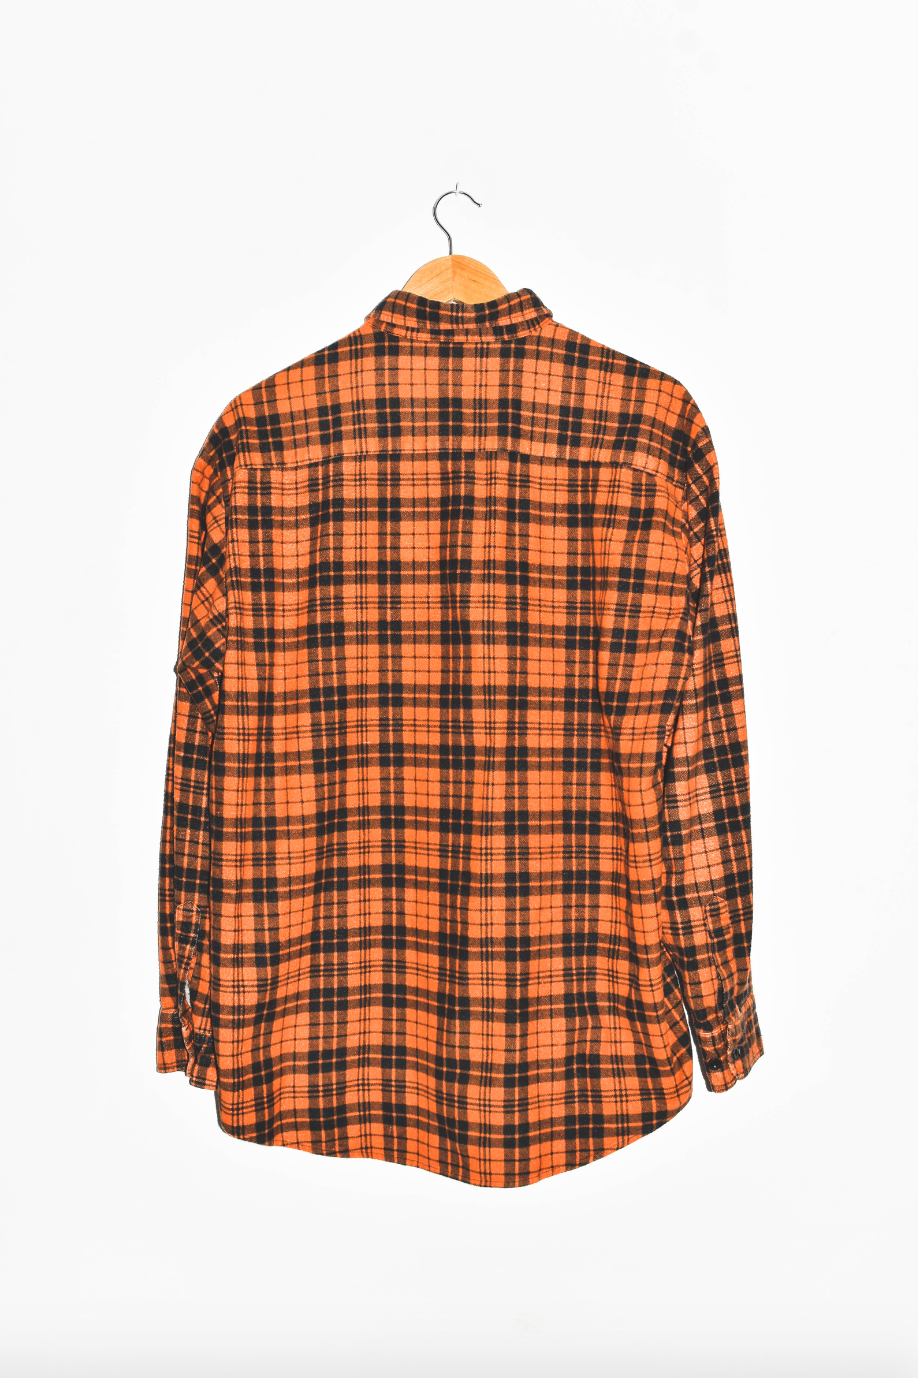 NEW IN! Flannel